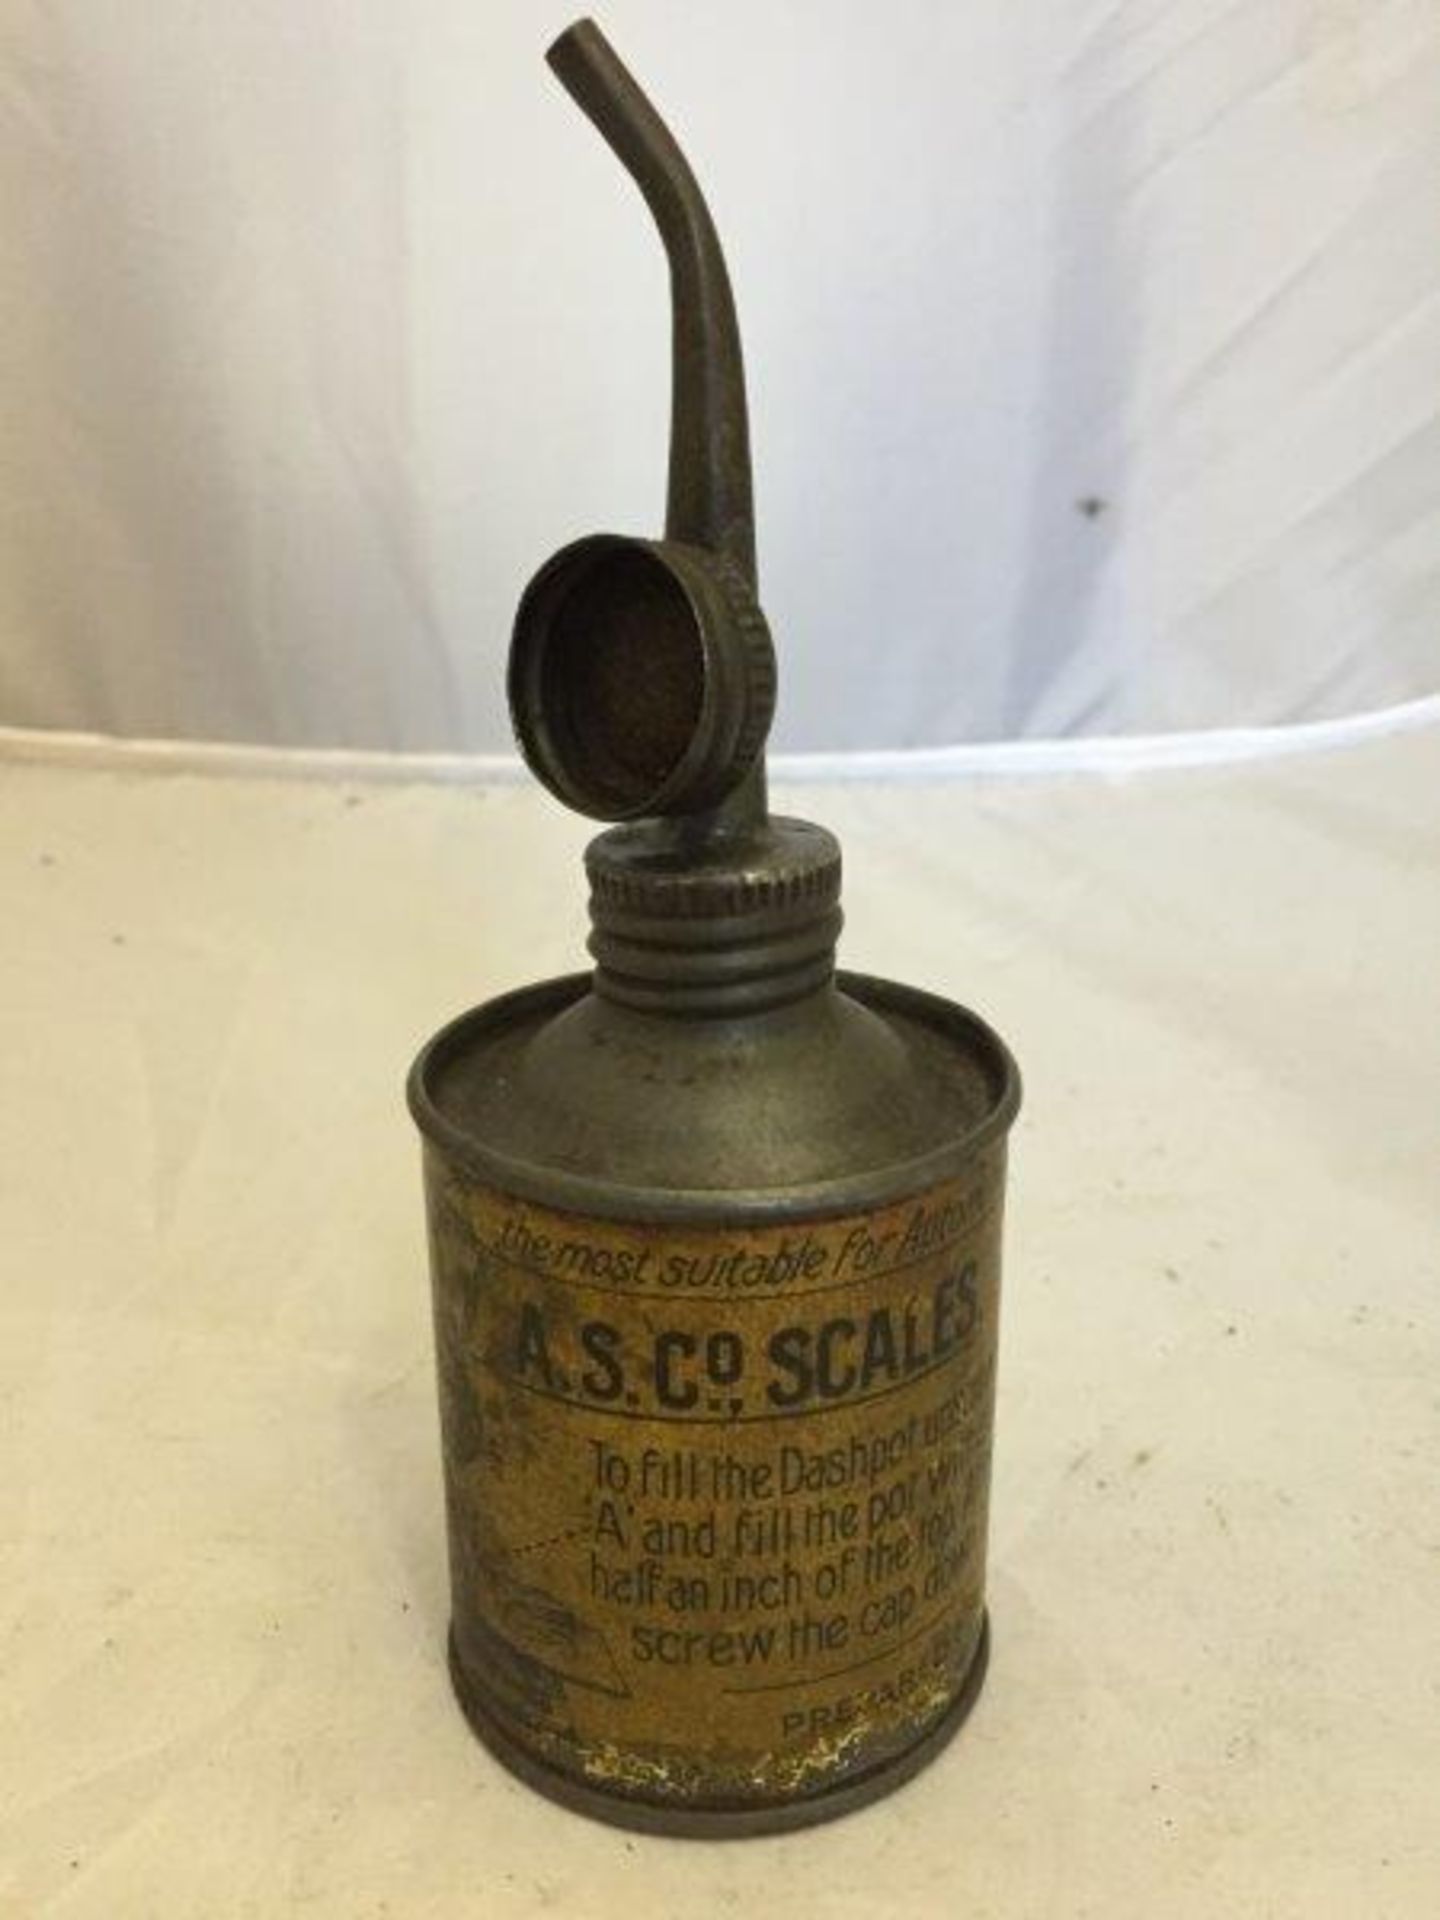 An A.S. Co. Scales dashpot oil can with two-way spout.